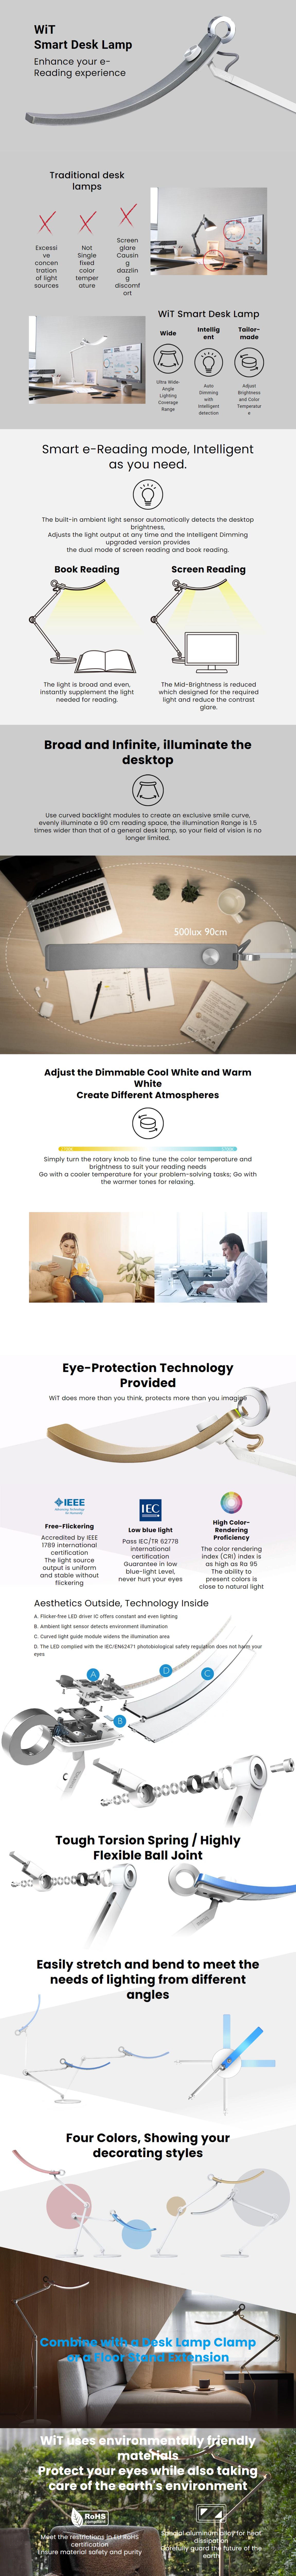 A large marketing image providing additional information about the product BenQ WiT eReading Desk Lamp - Sunset Gold - Additional alt info not provided